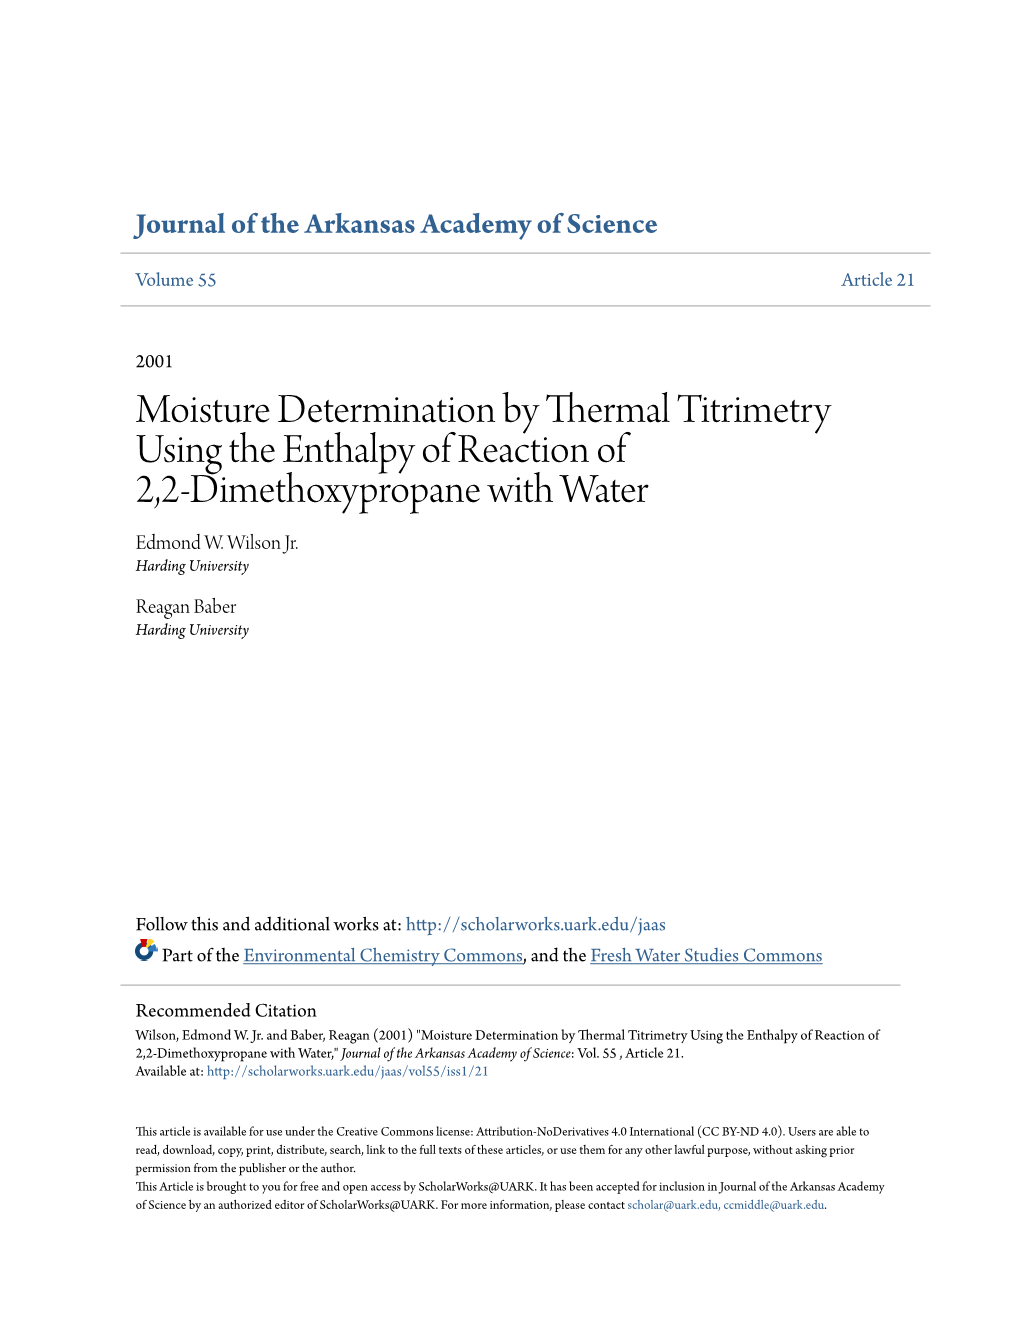 Moisture Determination by Thermal Titrimetry Using the Enthalpy of Reaction of 2,2-Dimethoxypropane with Water Edmond W